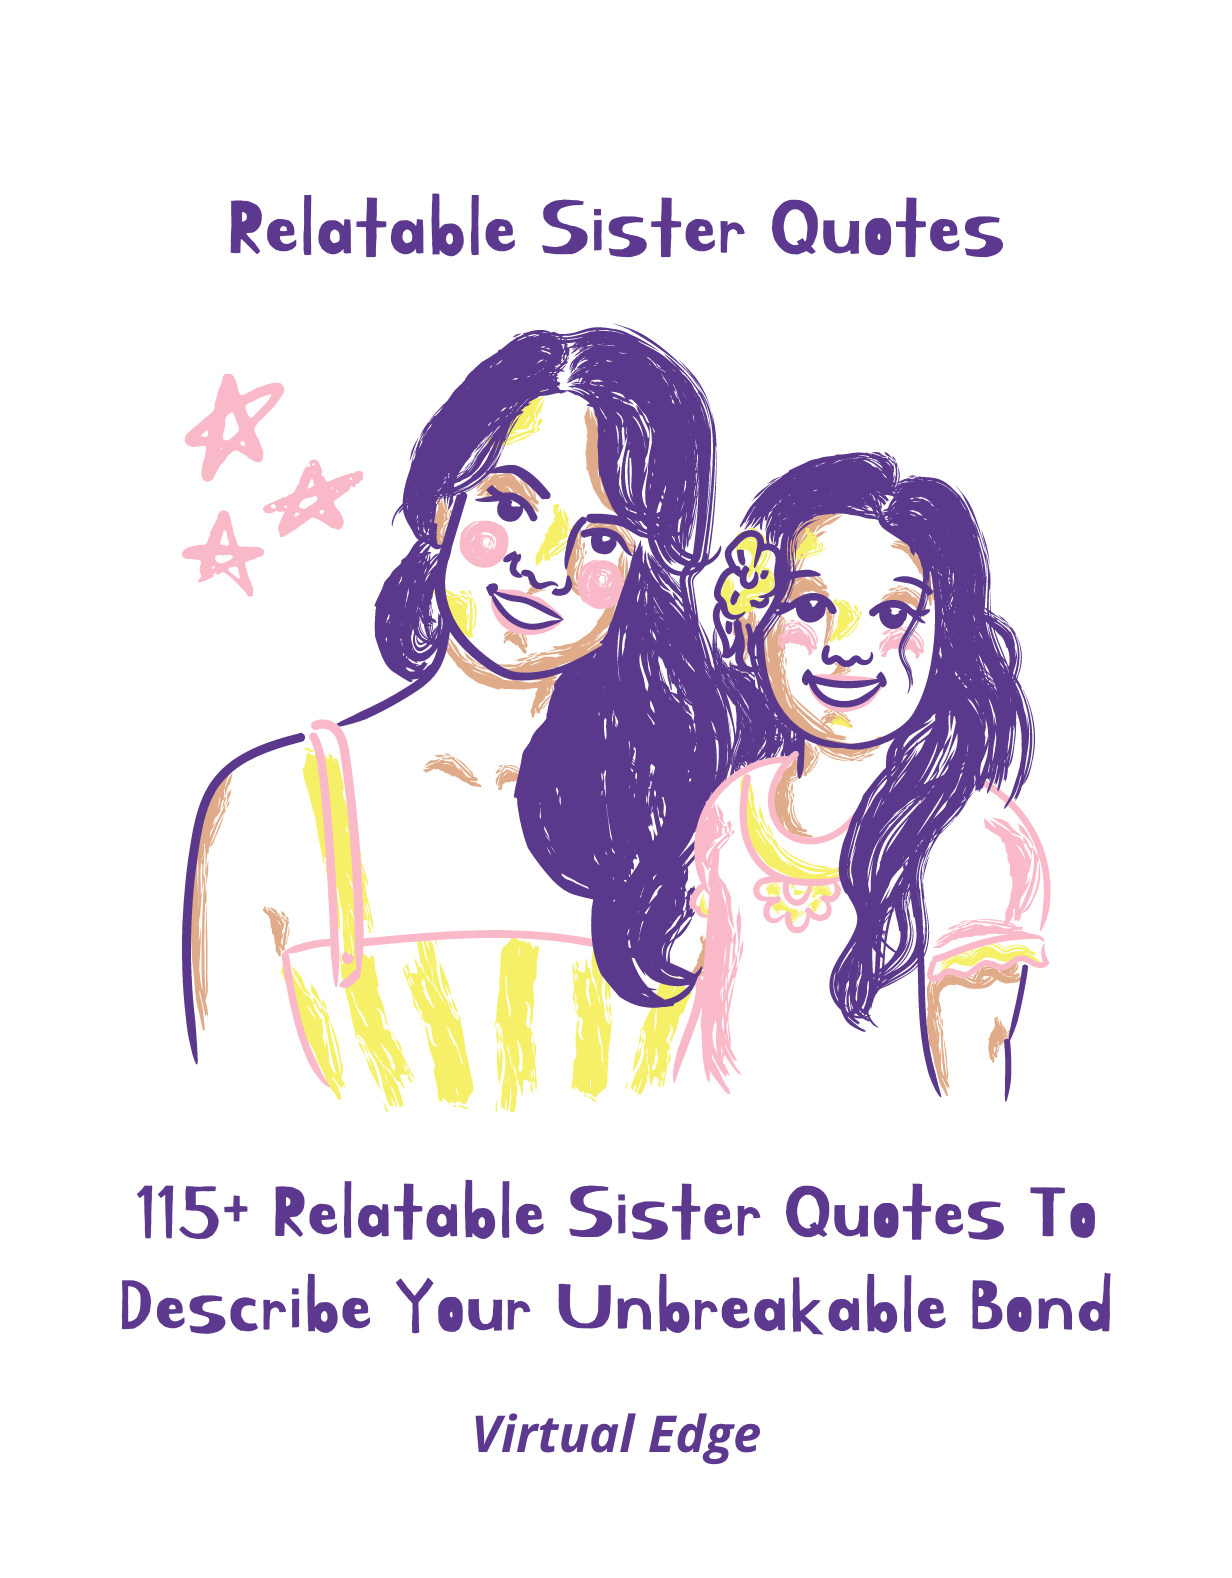 115+ Relatable Sister Quotes To Describe Your Unbreakable Bond